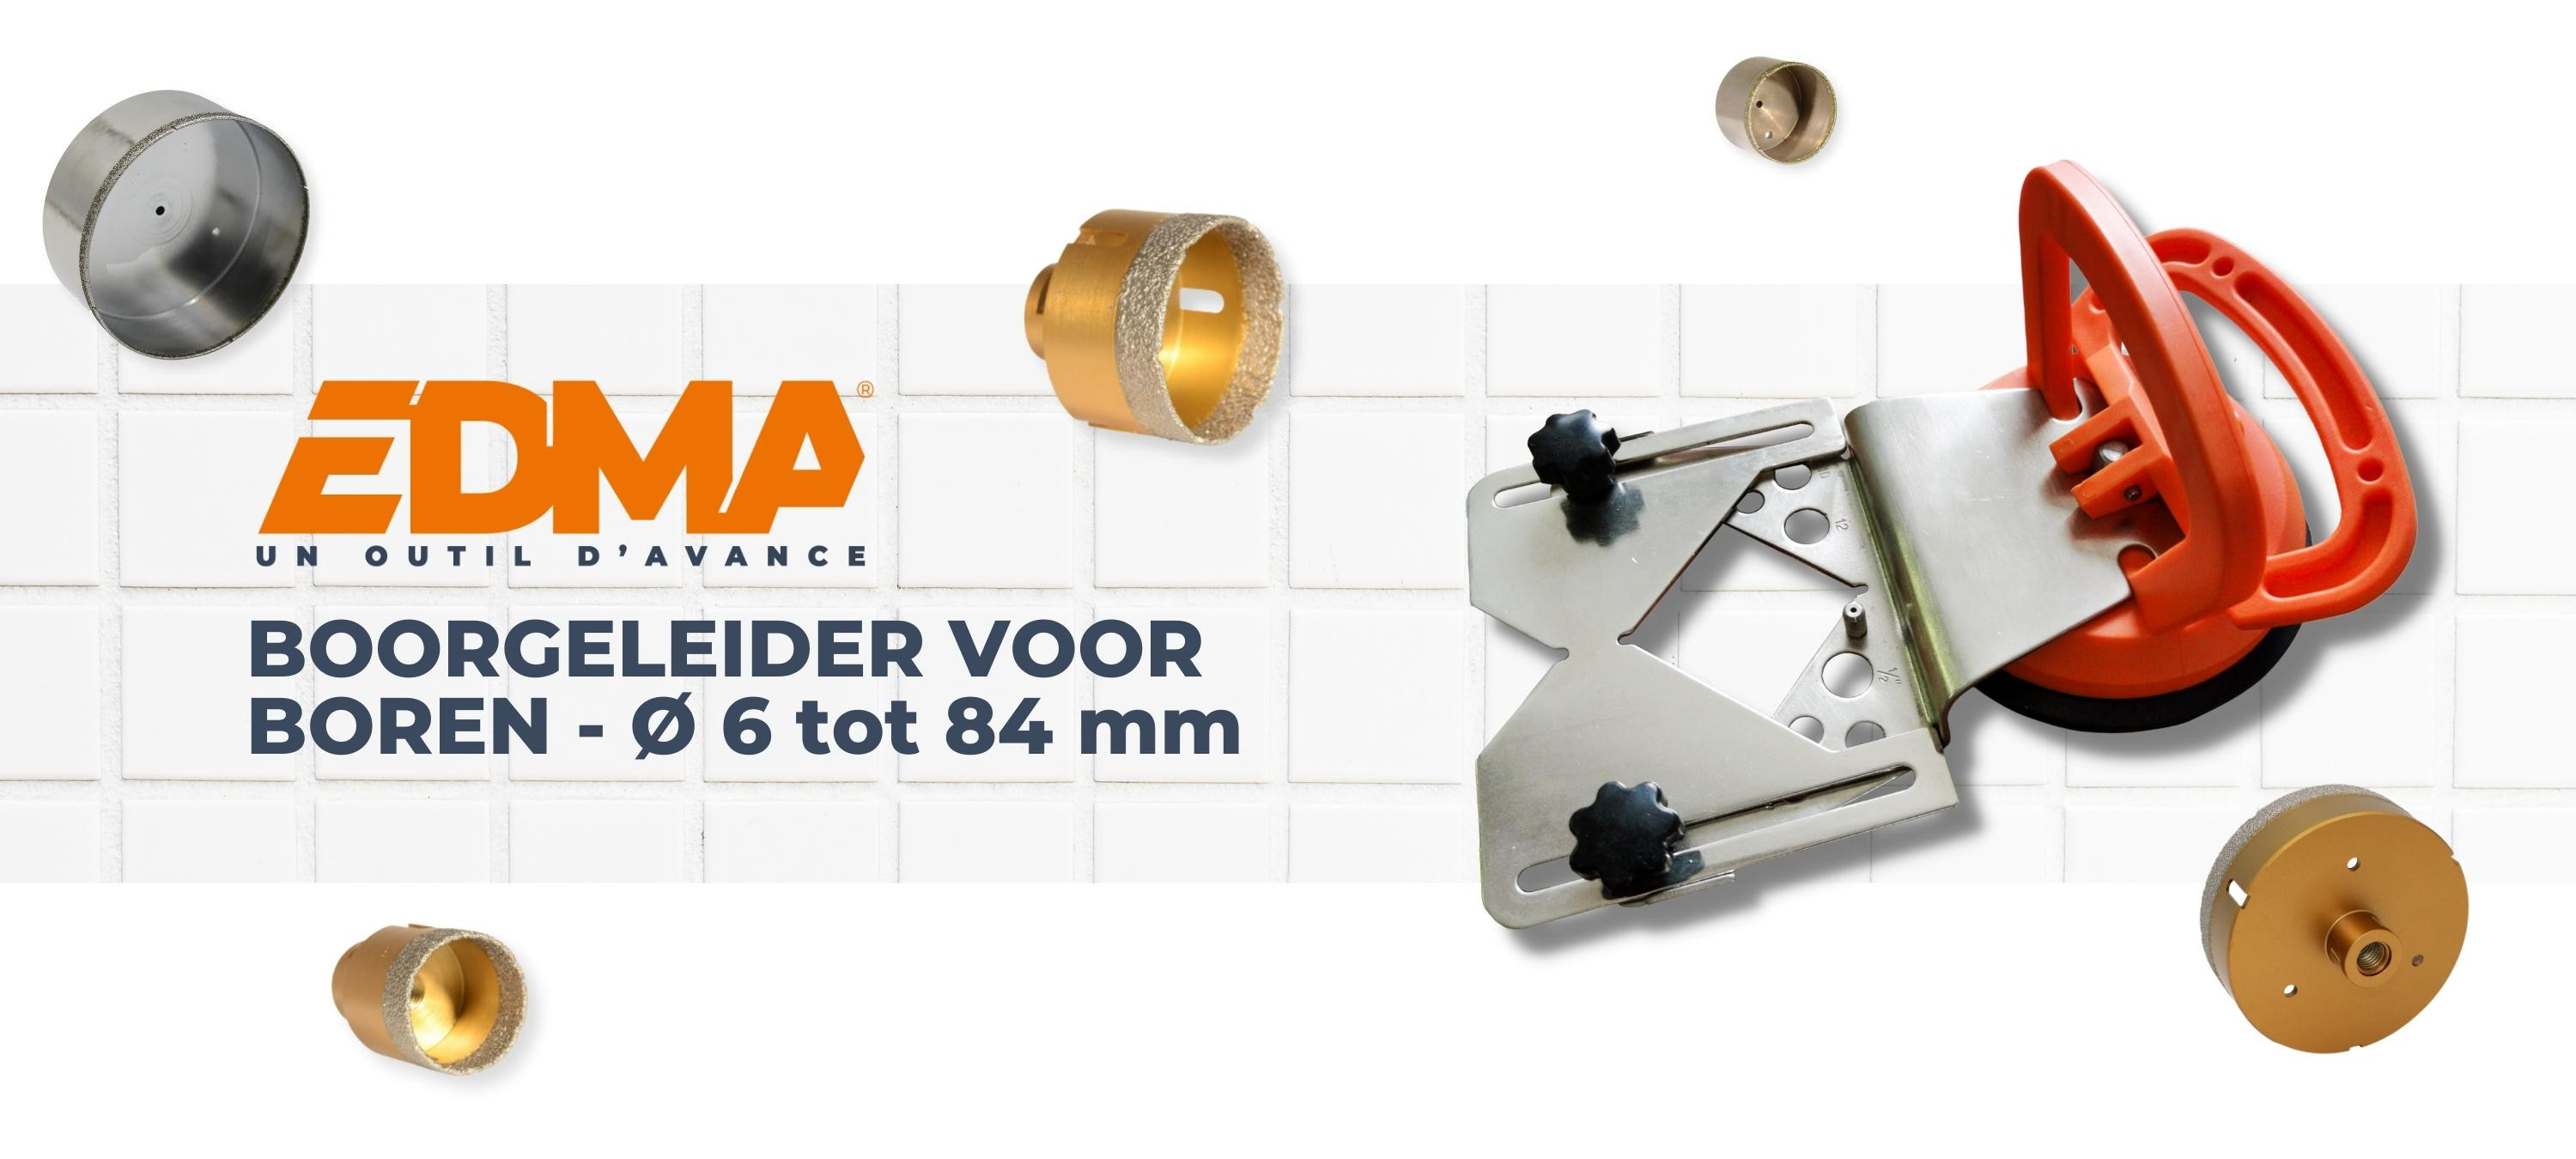 EDMA DRILL GUIDE FOR DRILL BITS - Ø 6 to 84 mm